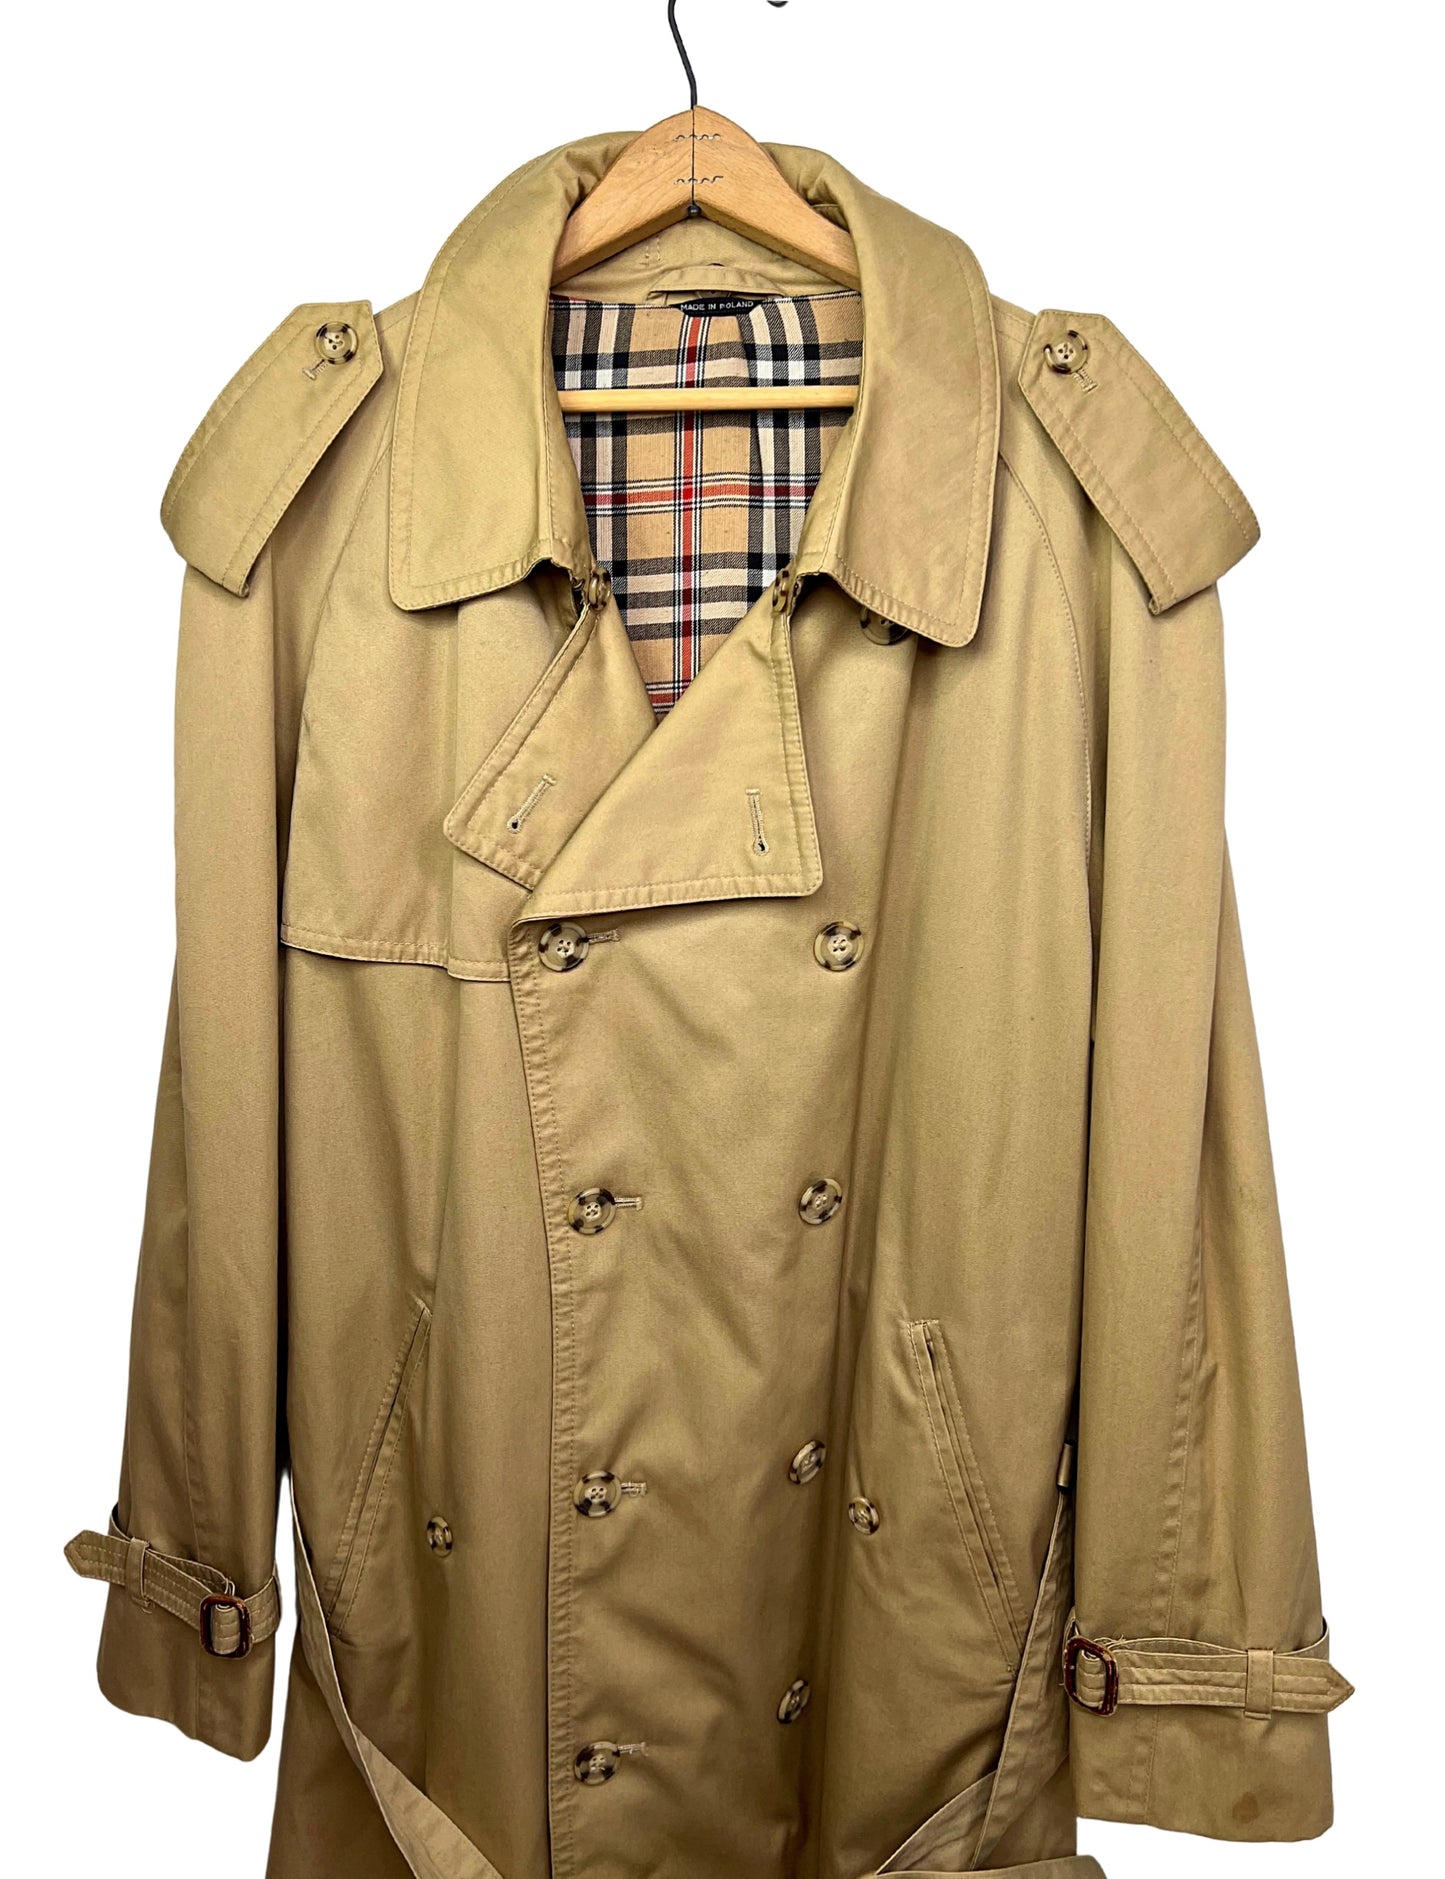 60’s Burberry Inspired Plaid Lined Belted Khaki Trench Coat Size 44